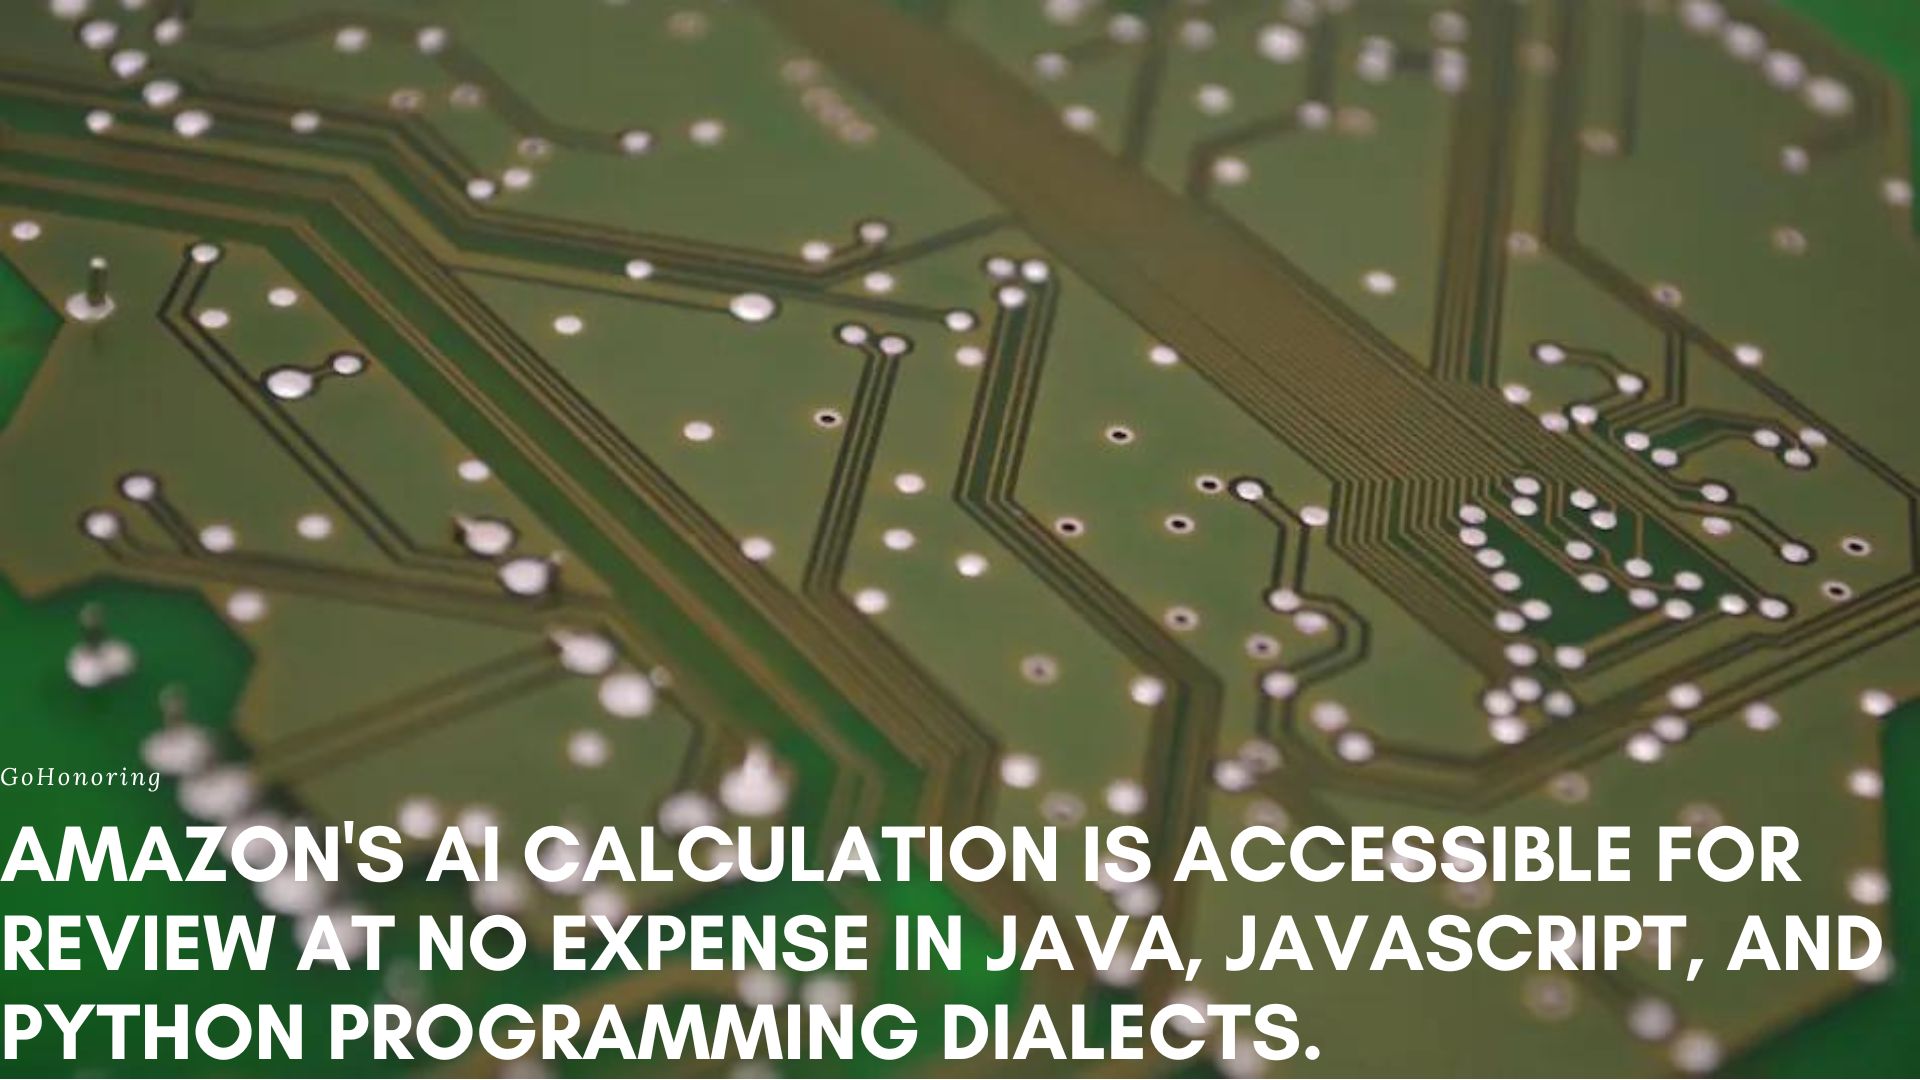 Amazon's AI calculation is accessible for review at no expense in Java, JavaScript, and Python programming dialects.